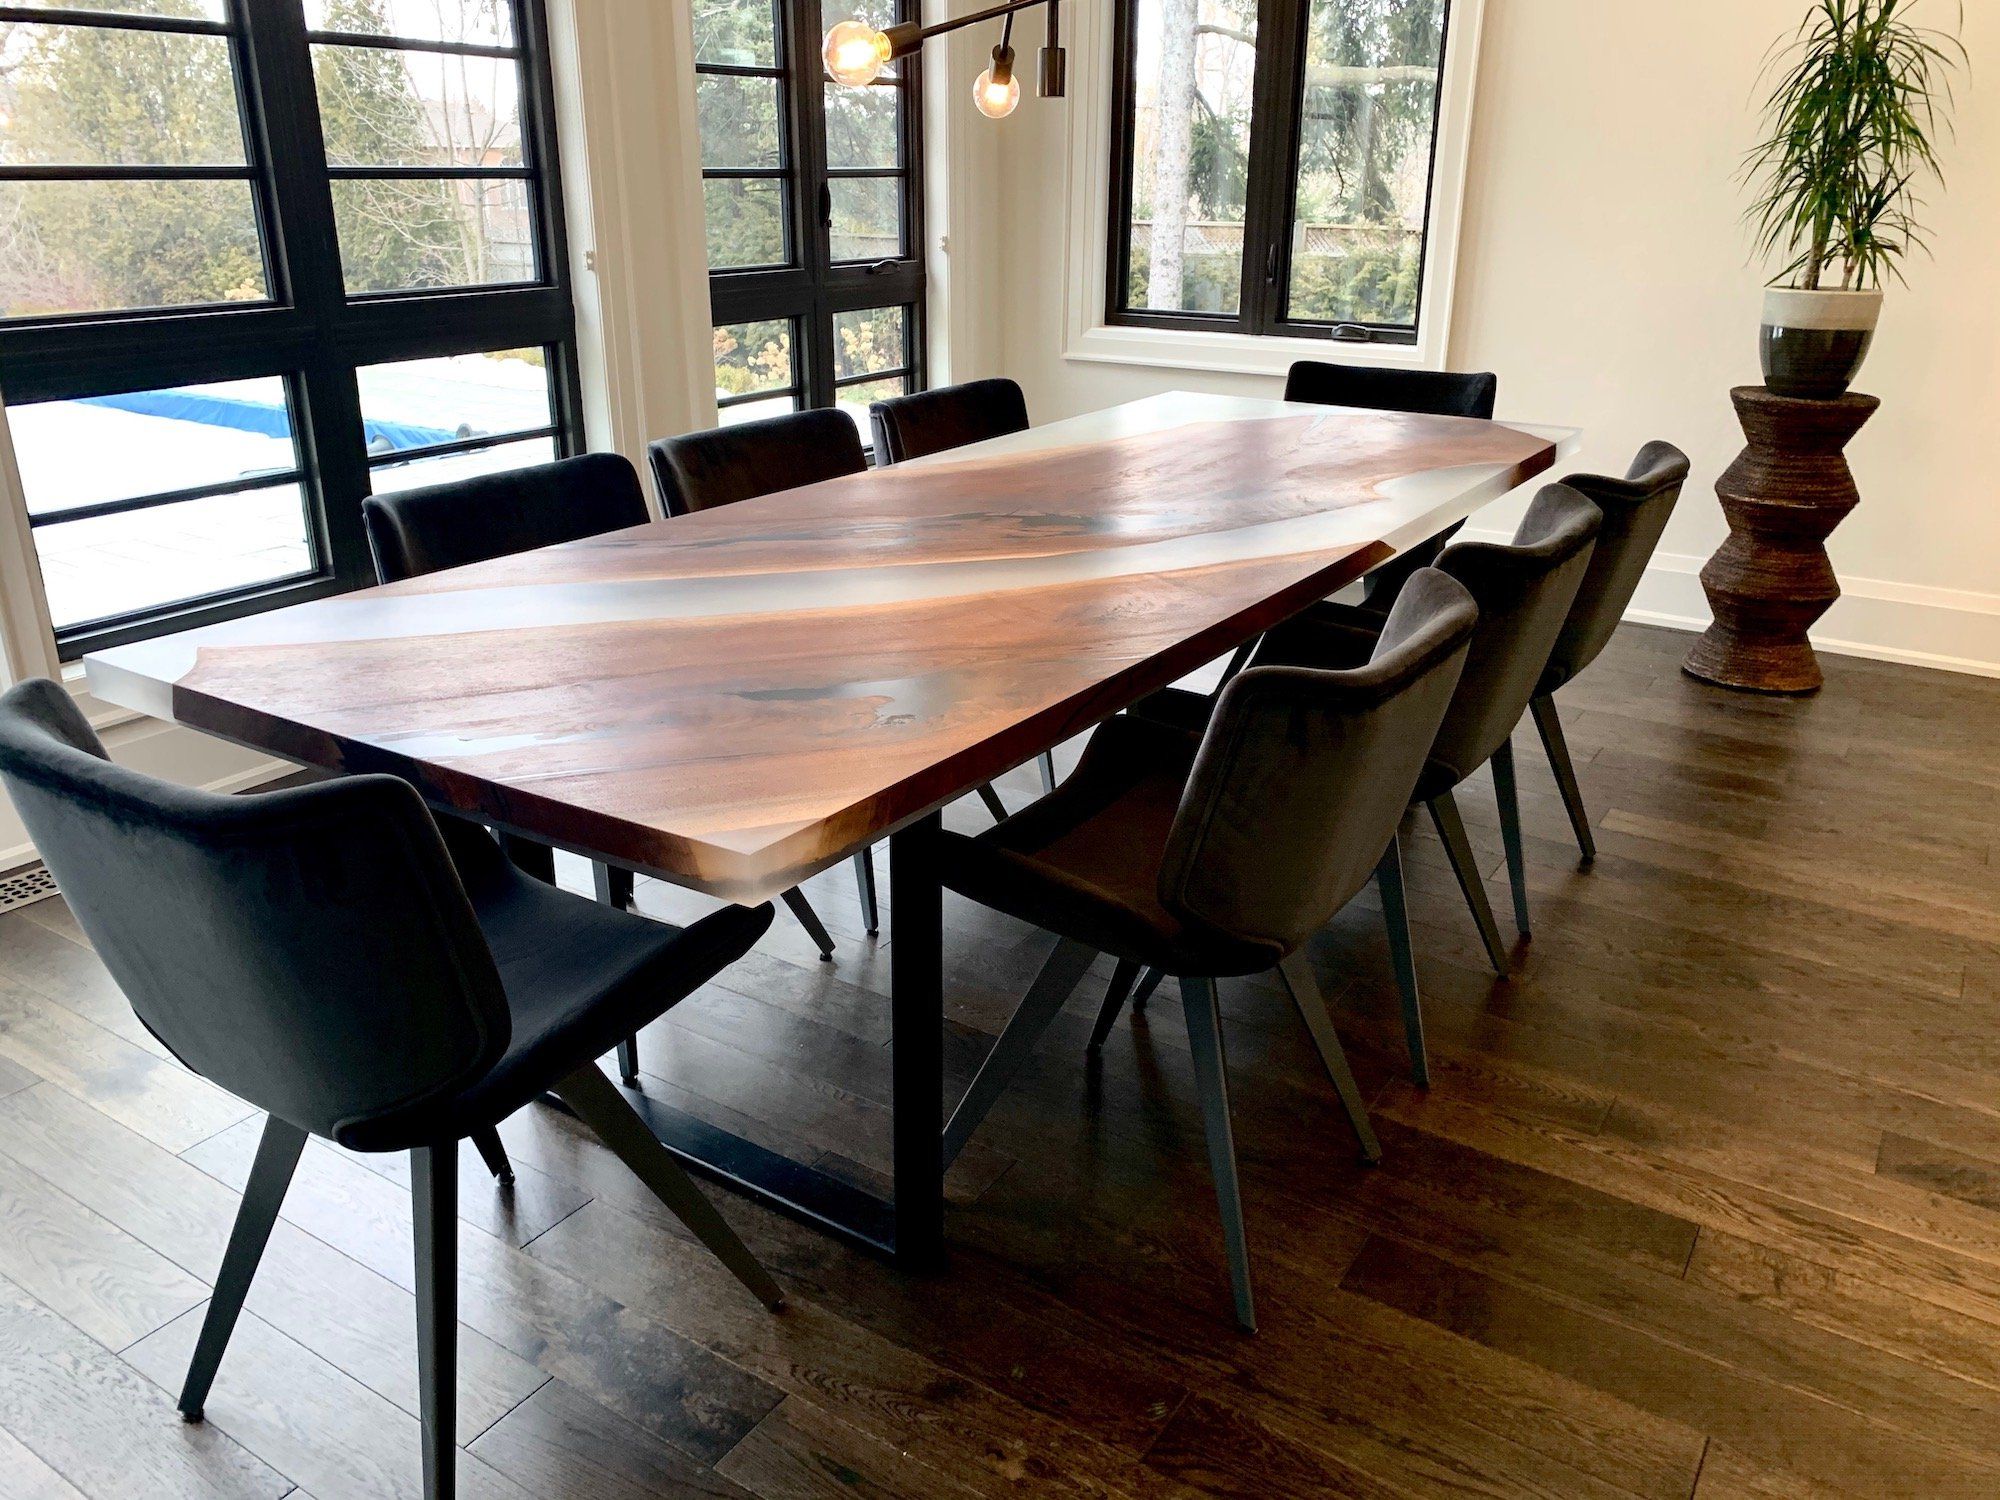 White And Black Dining Tables In Well Known Dining Table Black Walnut Wood With Black And White Epoxy (Gallery 15 of 20)